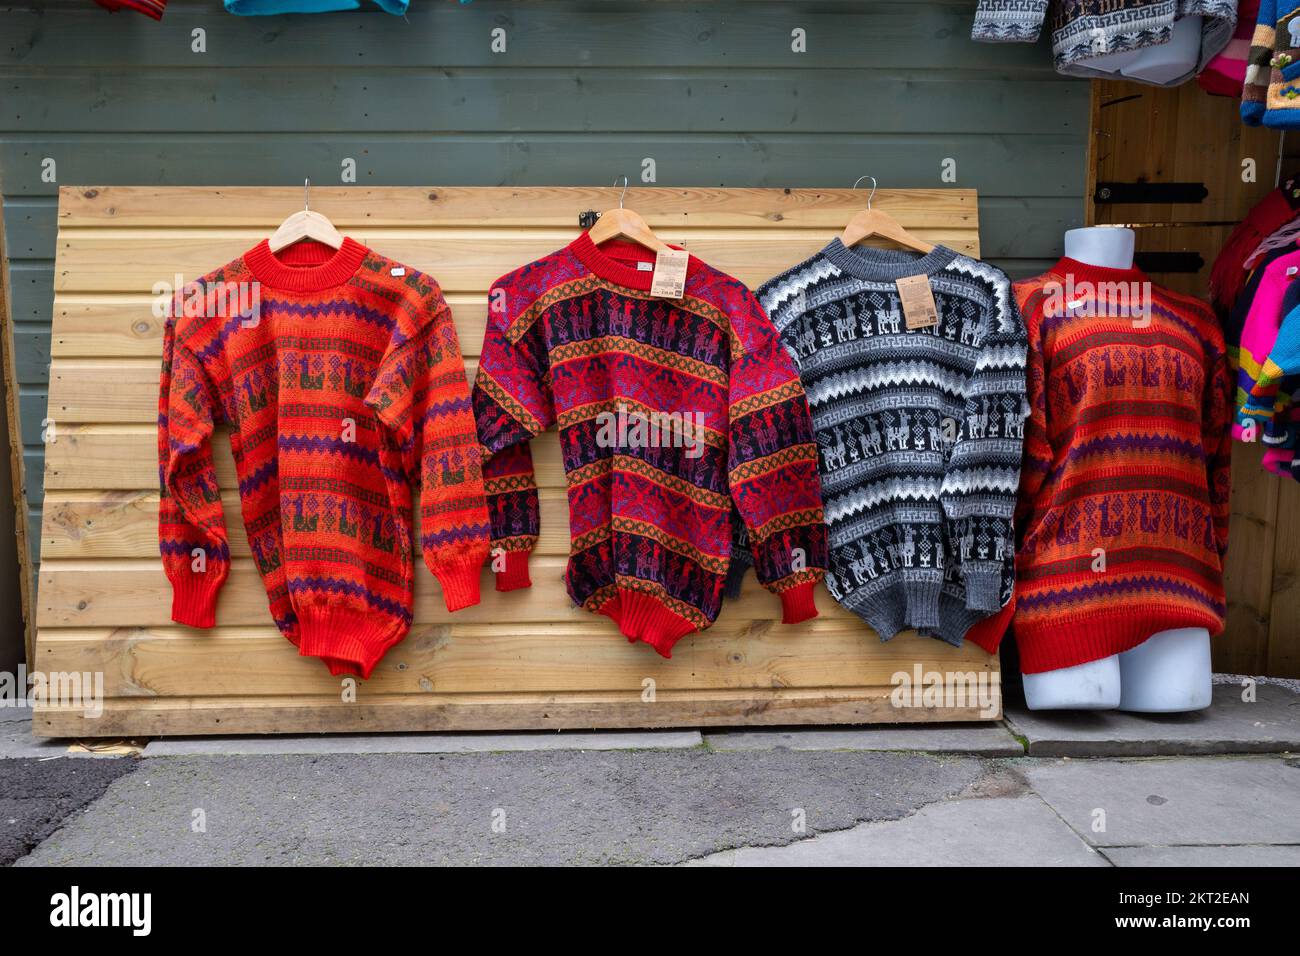 Handmade woollen knitted jumpers on a stall at Bath Markets (Nov22) Stock Photo